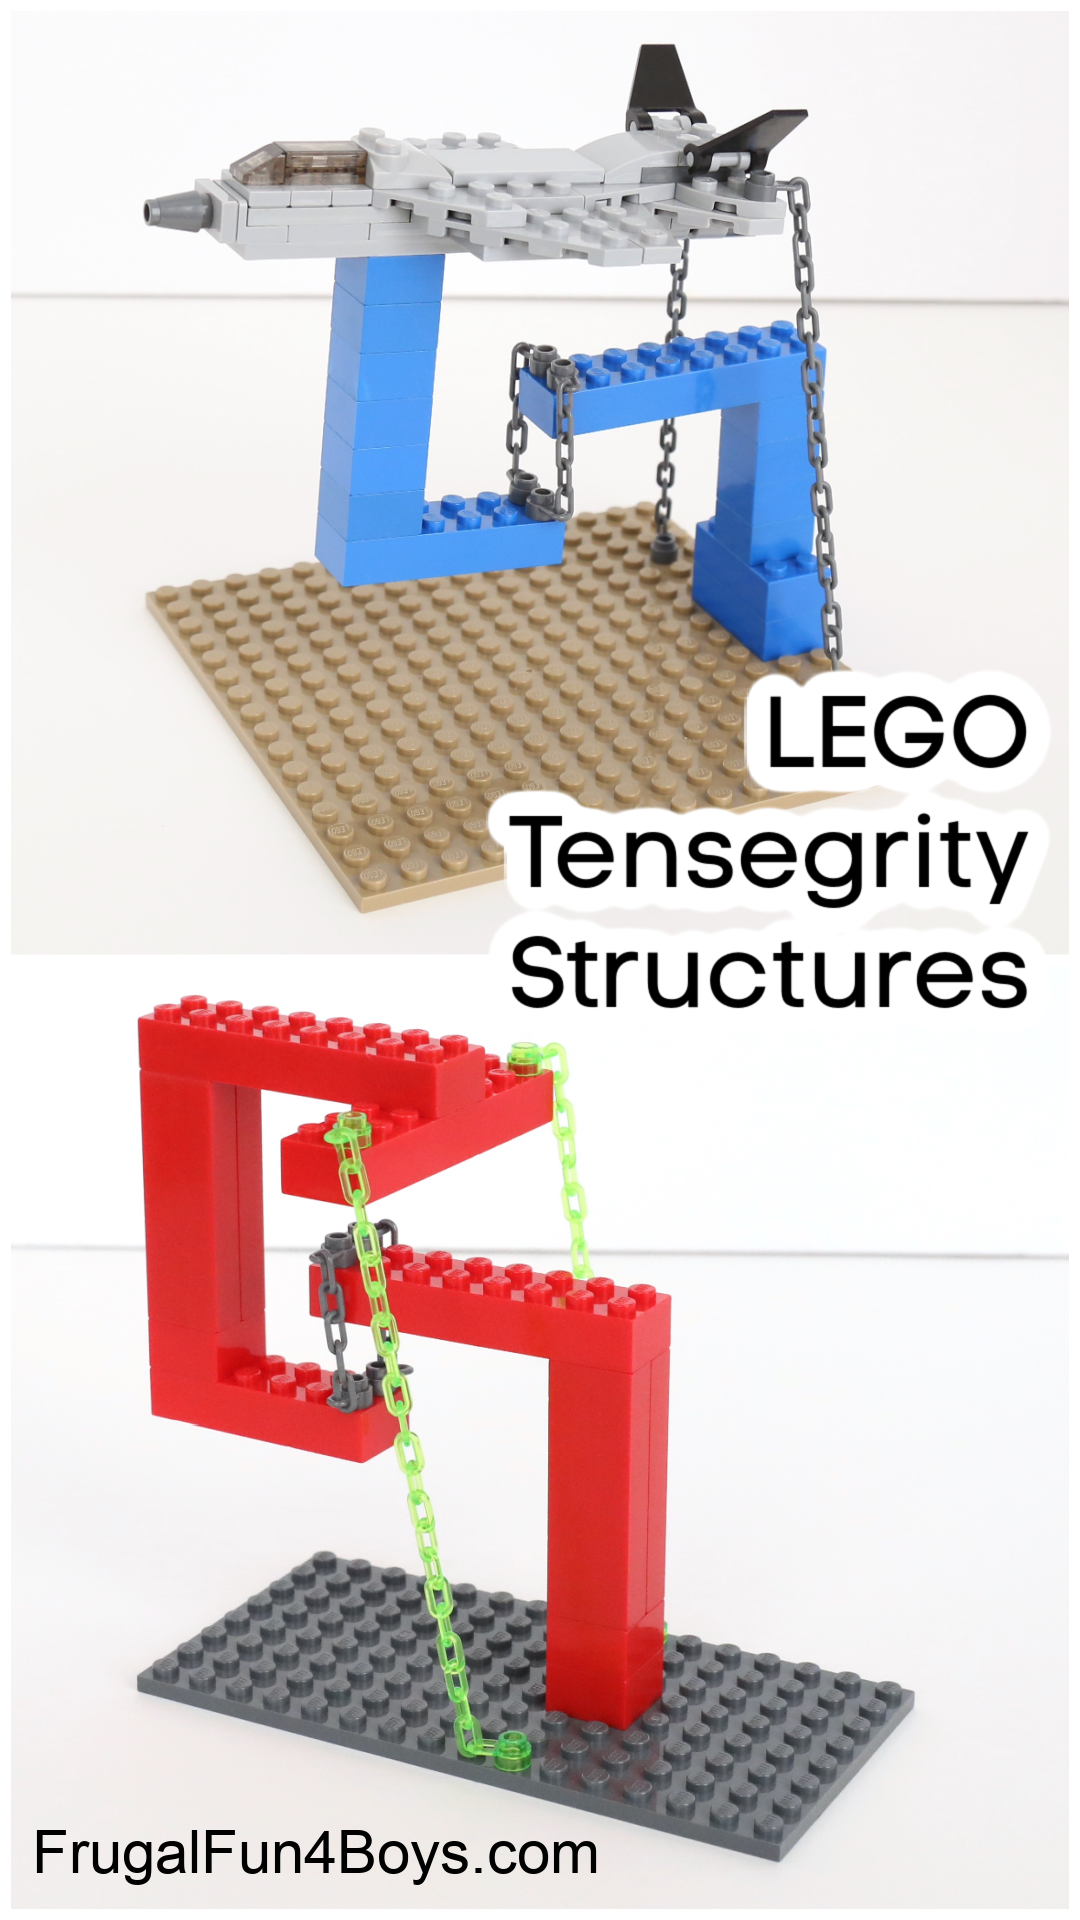 Lego Tensegrity Structures